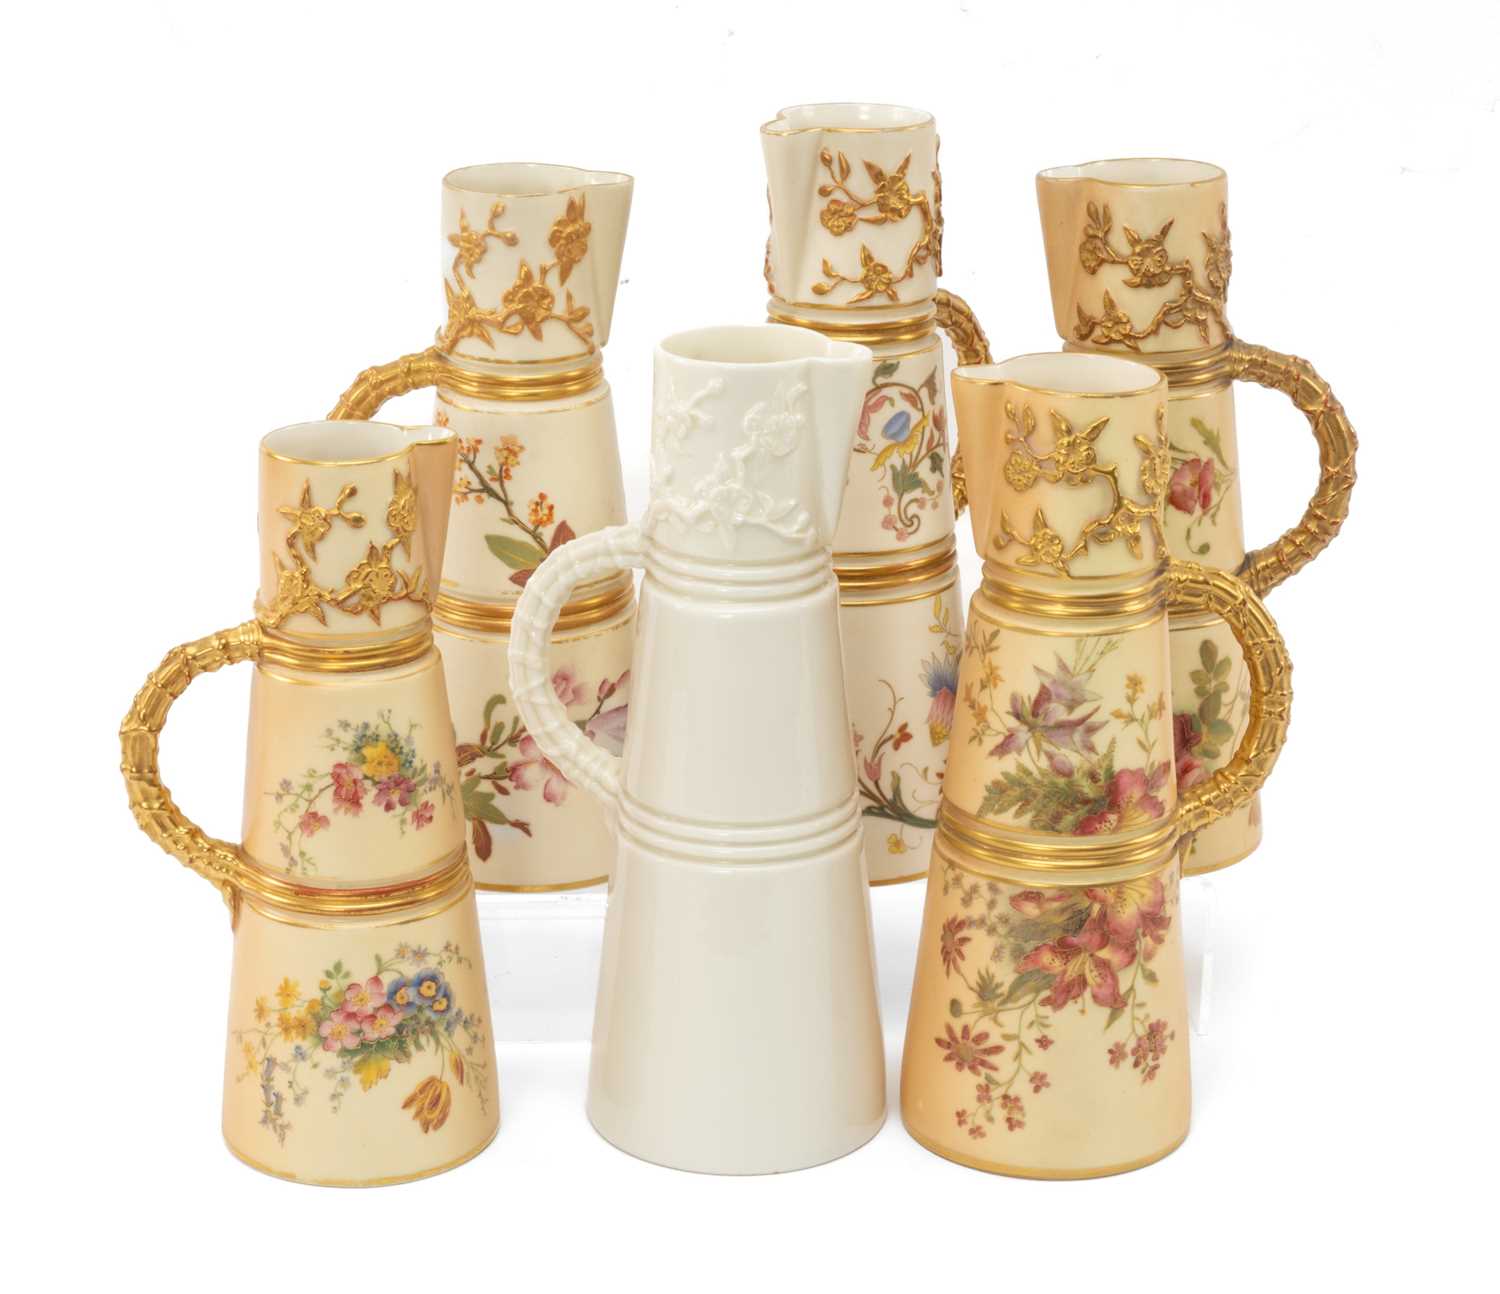 SIX ROYAL WORCESTER SHAPE 1047 JUGS, comprising 3 gilt and blush ivory tapering jugs, 22cms and 22.